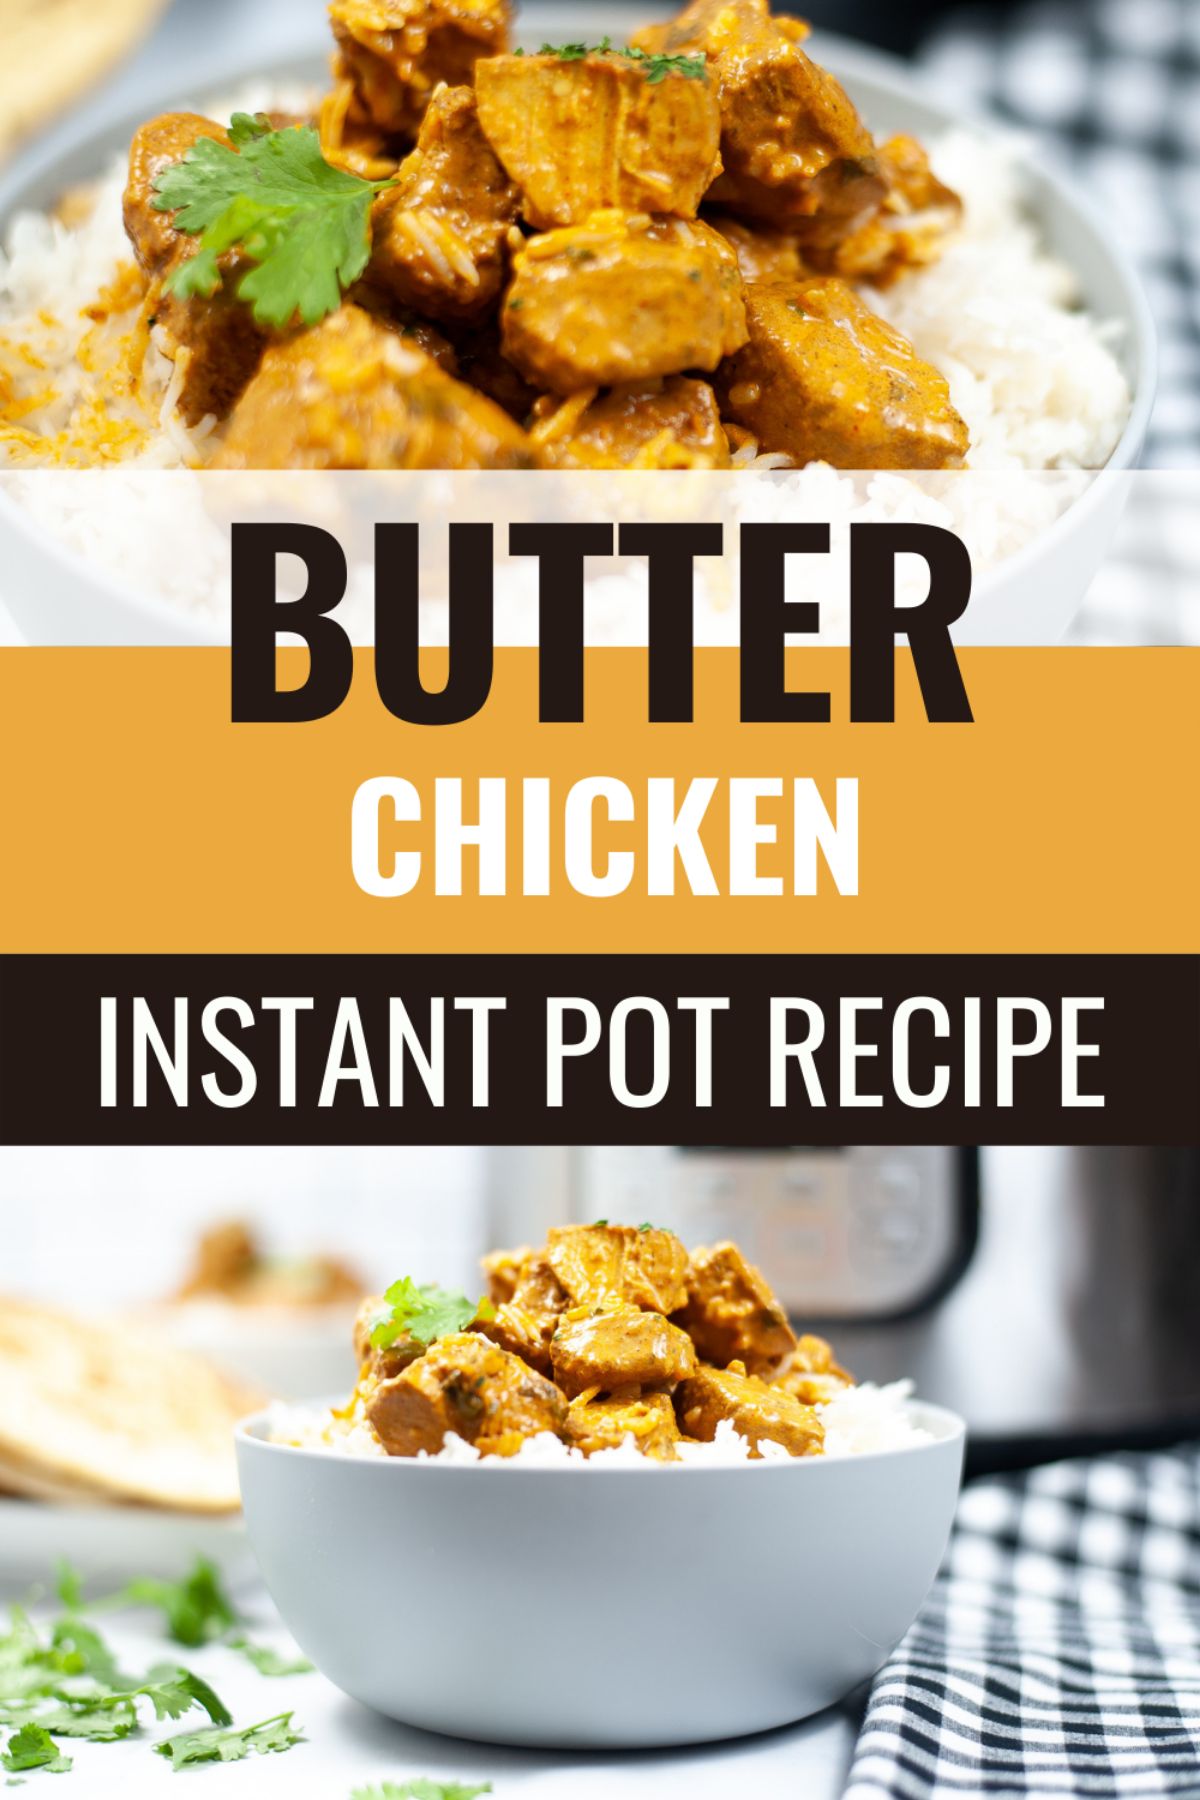 Instant Pot Butter Chicken is a delicious, easy-to-make dish that's perfect for dinner. It's a flavorful, creamy curry the family will love. #instantpot #pressurecooker #butterchicken #chickencurry #recipe via @wondermomwannab